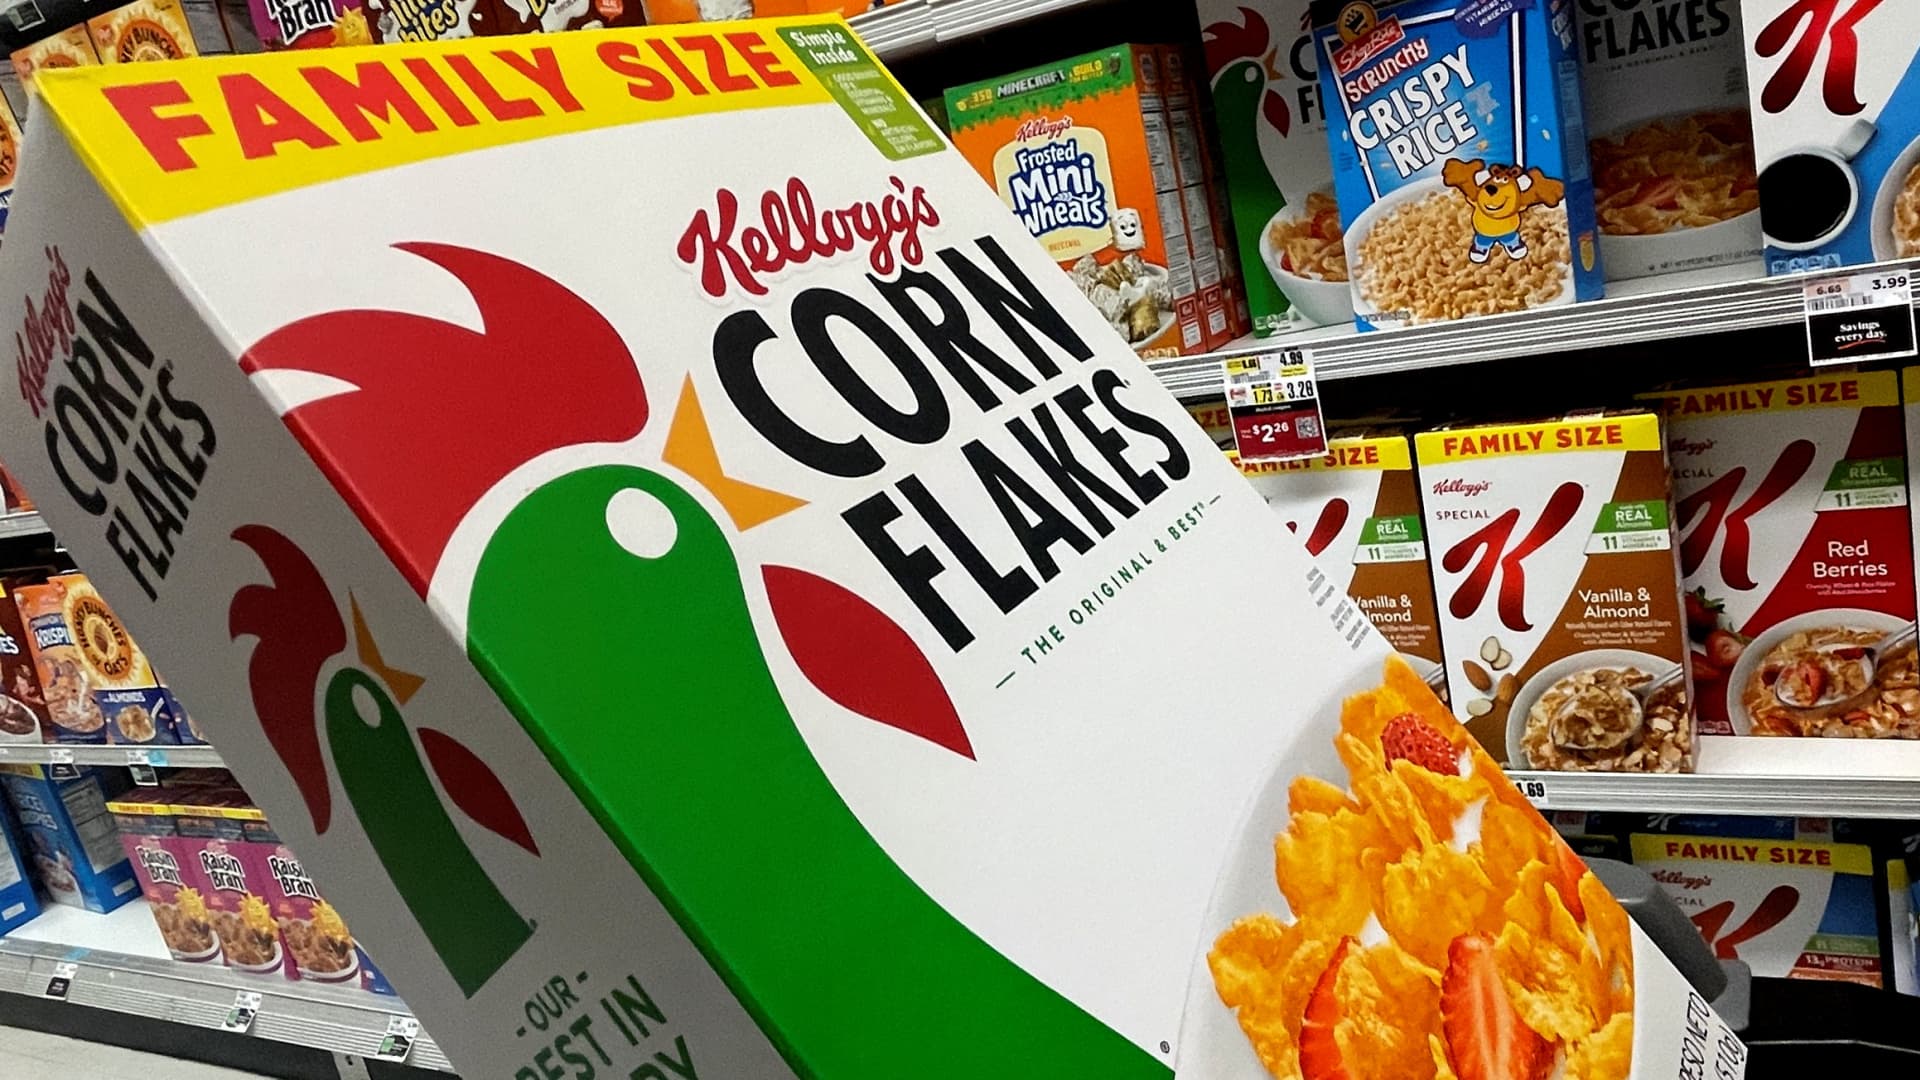 Kellogg, General Mills, Post cereal sales slow after pandemic surge